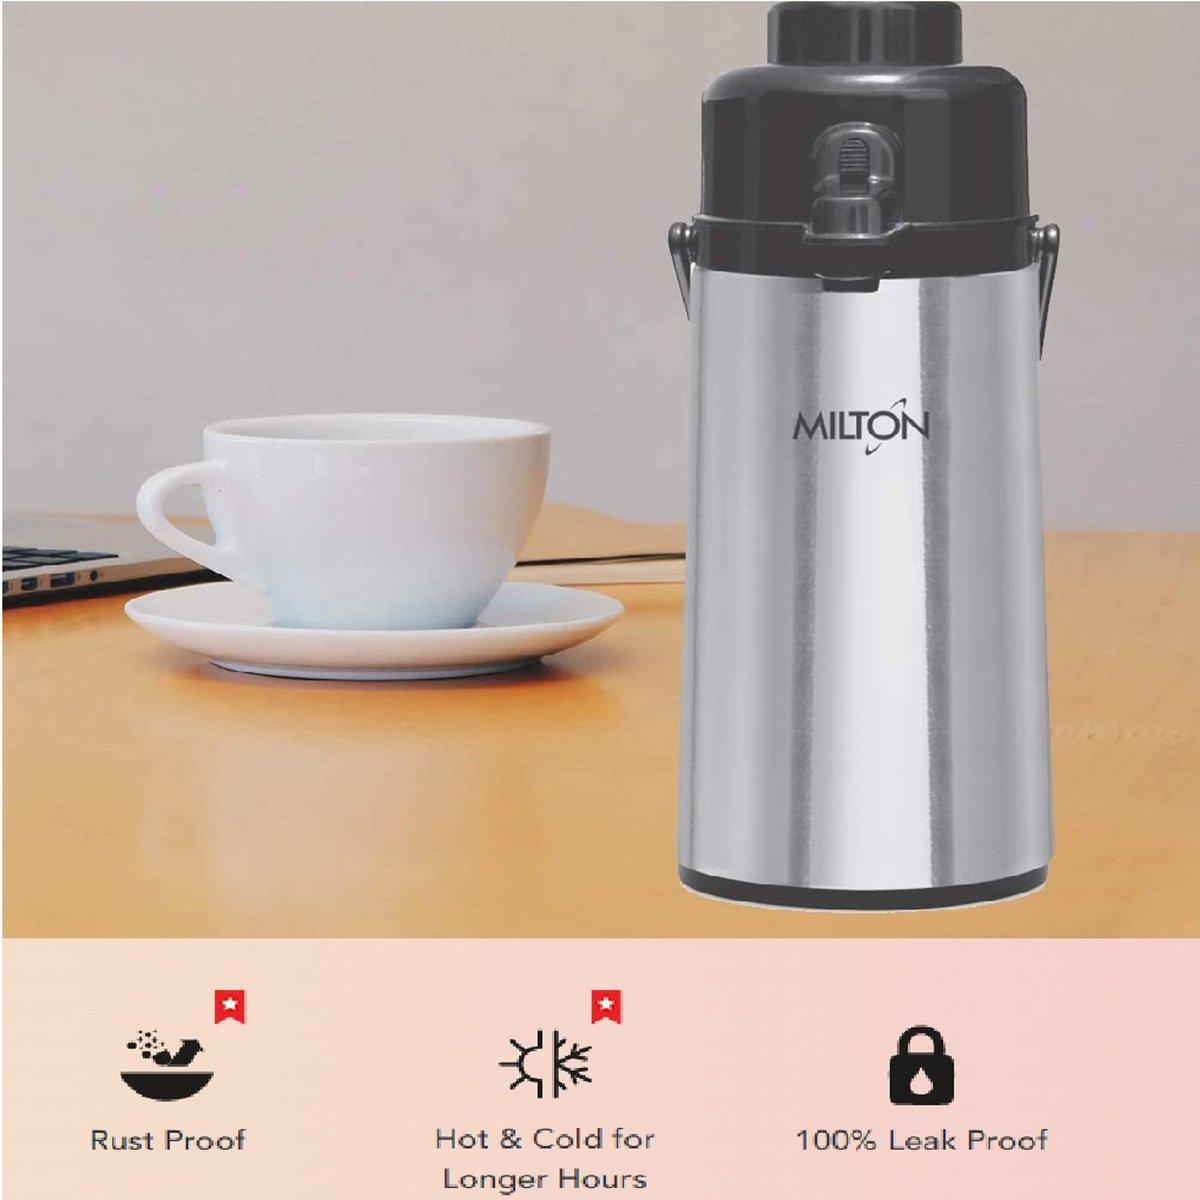 Milton Stainless Steel Vacuum Insulated Pumb Flask 2.4Ltr With Glass Refill Majesty DLX 2500